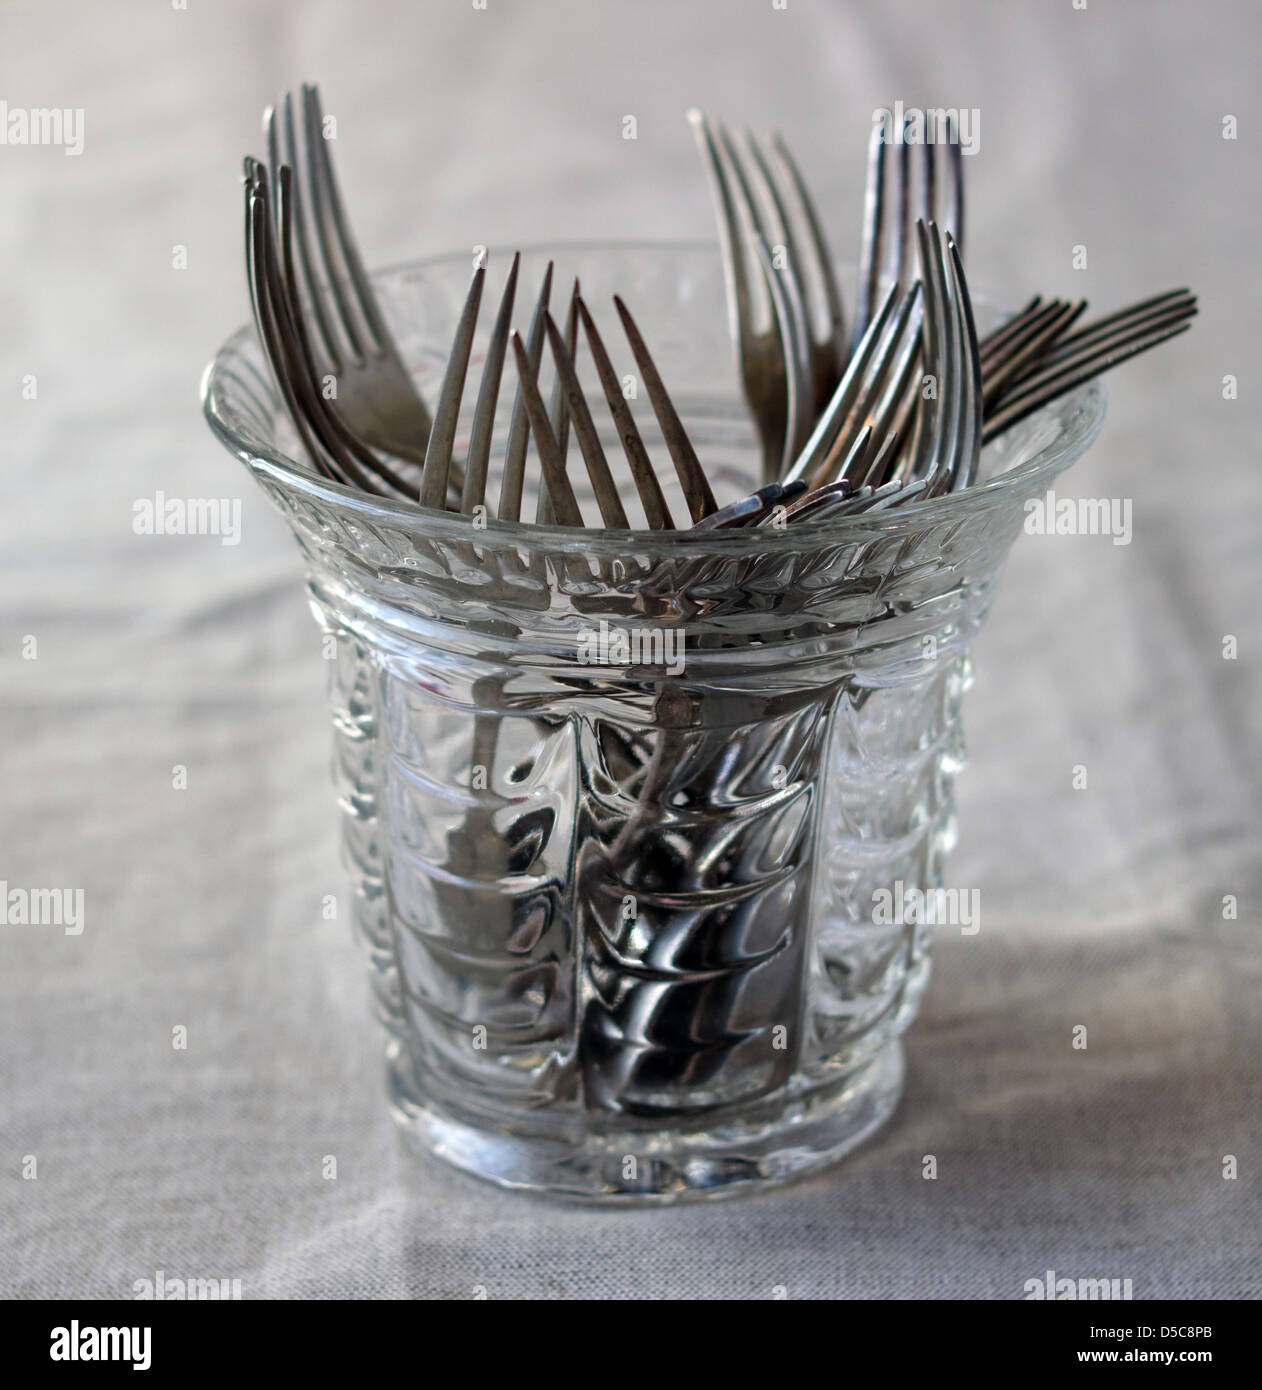 Forks in a glass vase Stock Photo